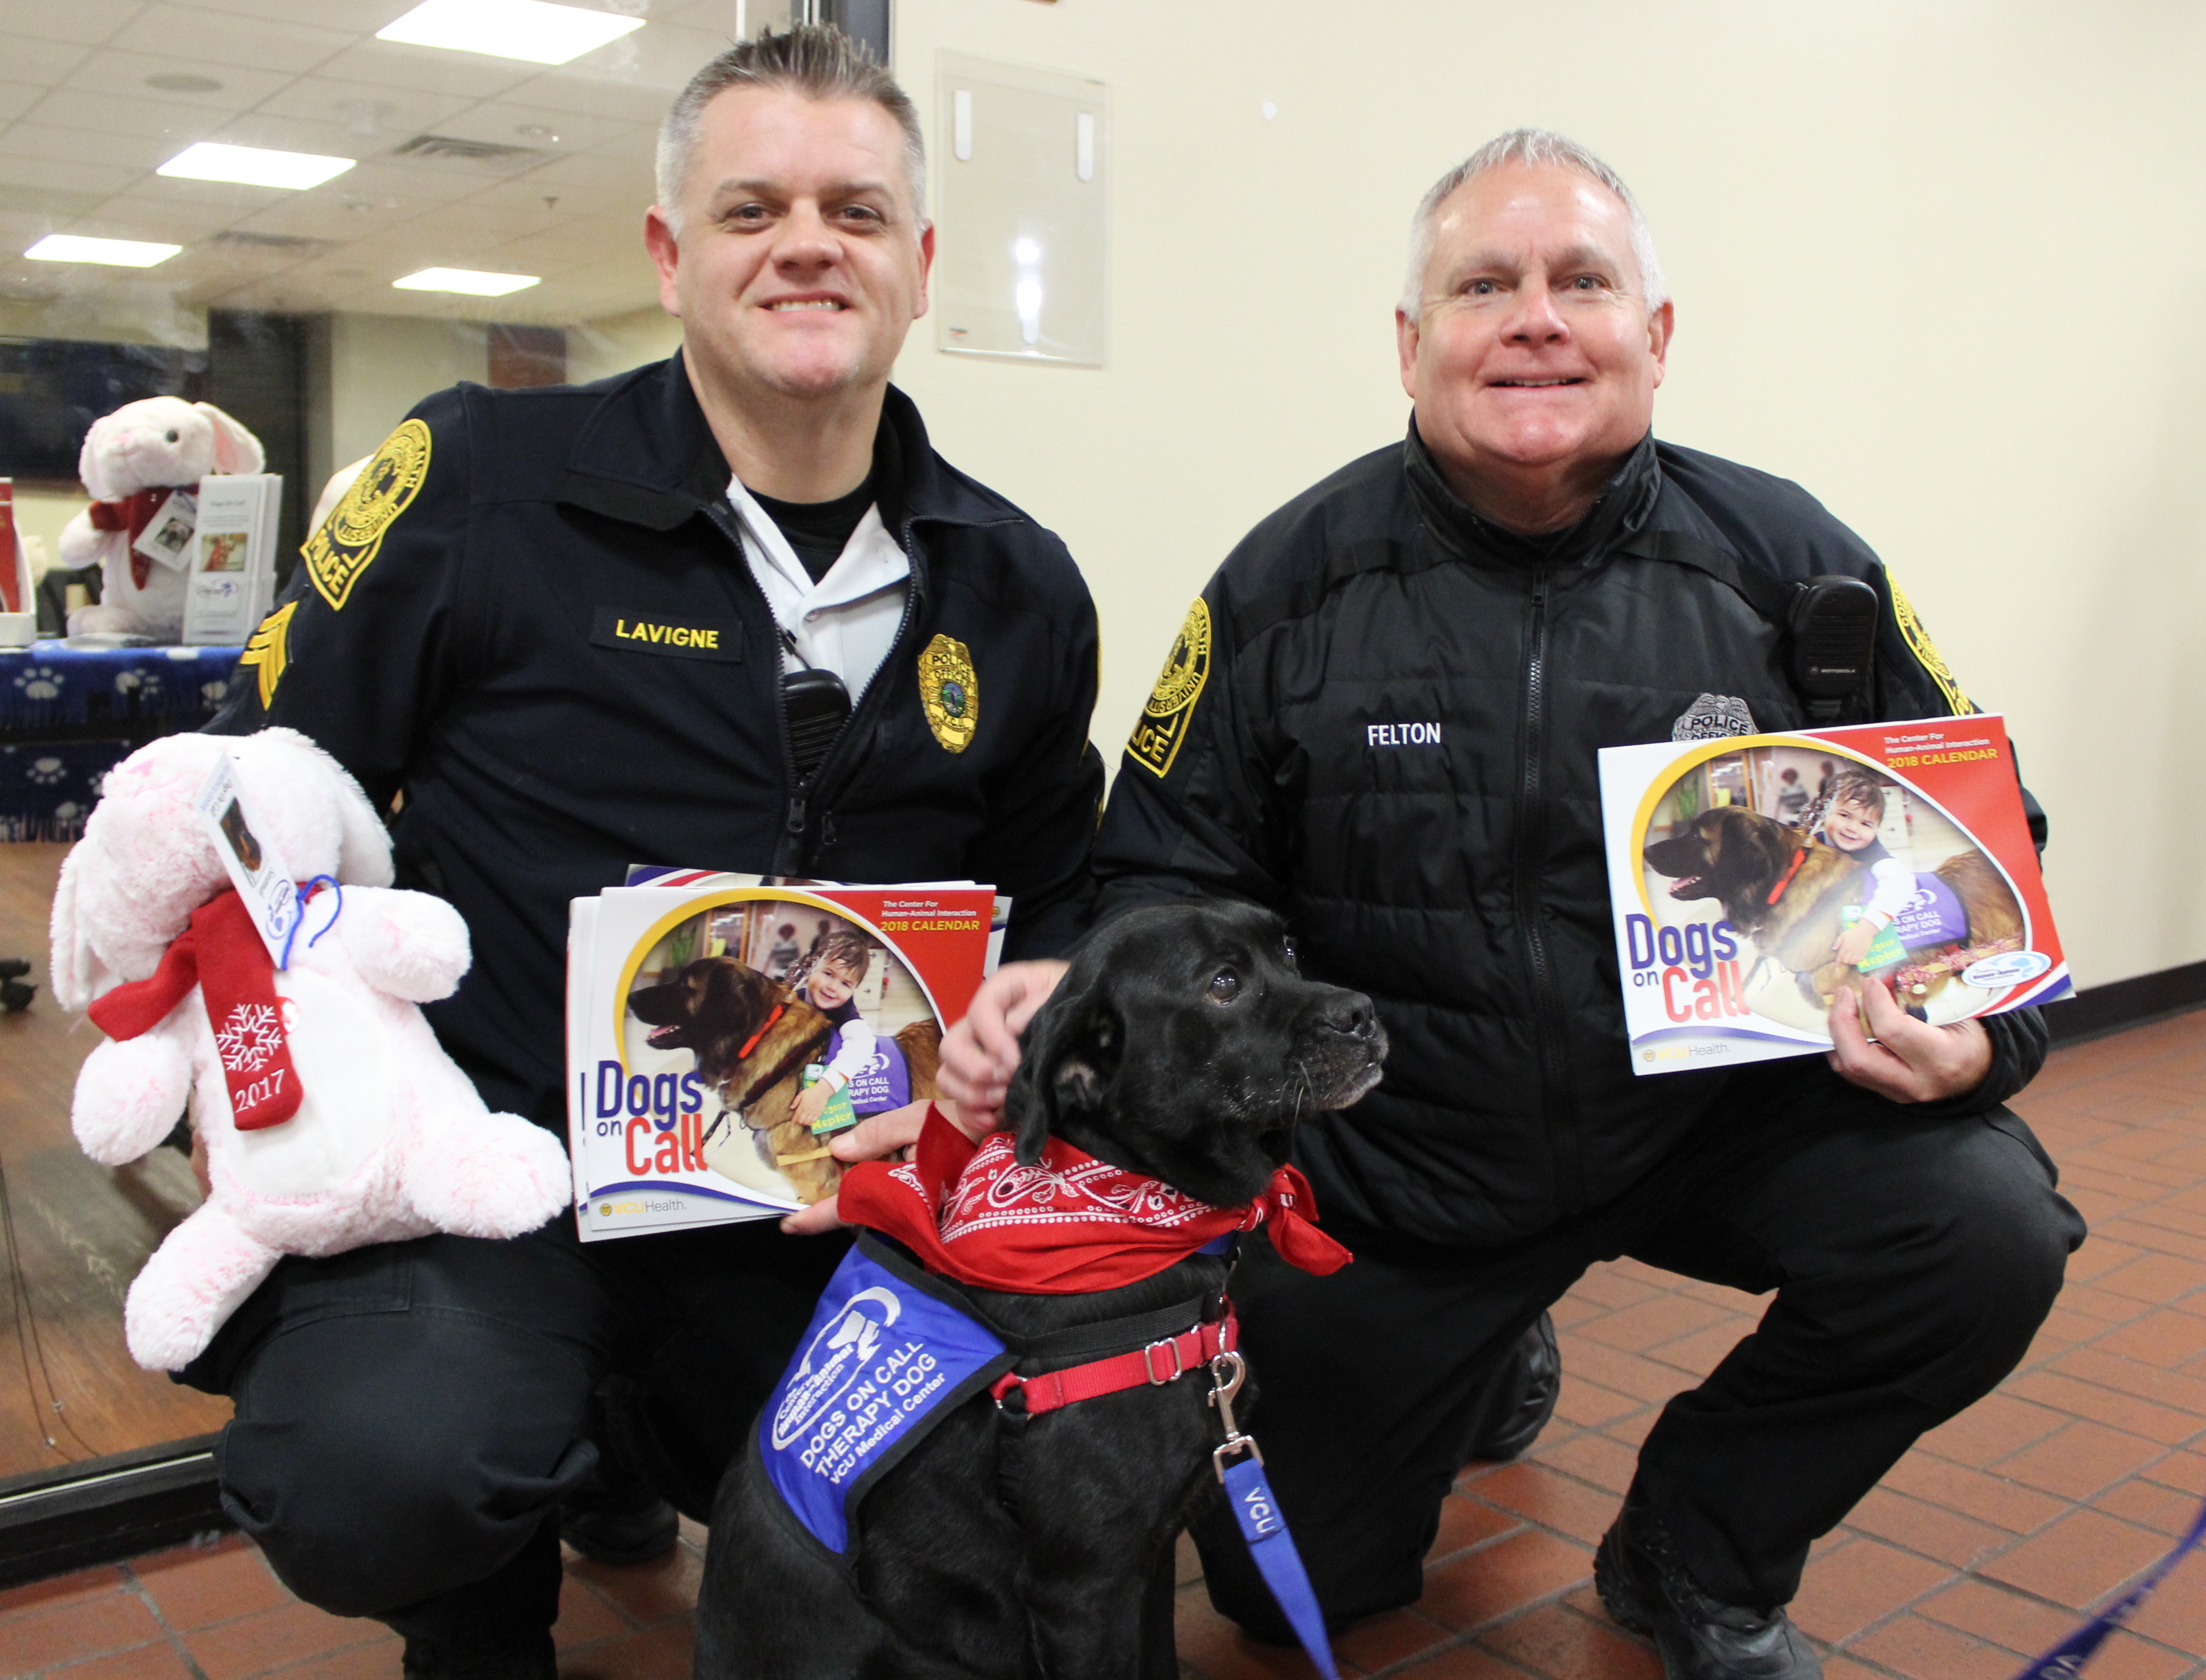 Two V C U police officers kneel beside Otis, a black lab and pug mix, while they hold the 2018 Dogs On Call Calendar and a pink stuffed animal donated by PetSmart Charities